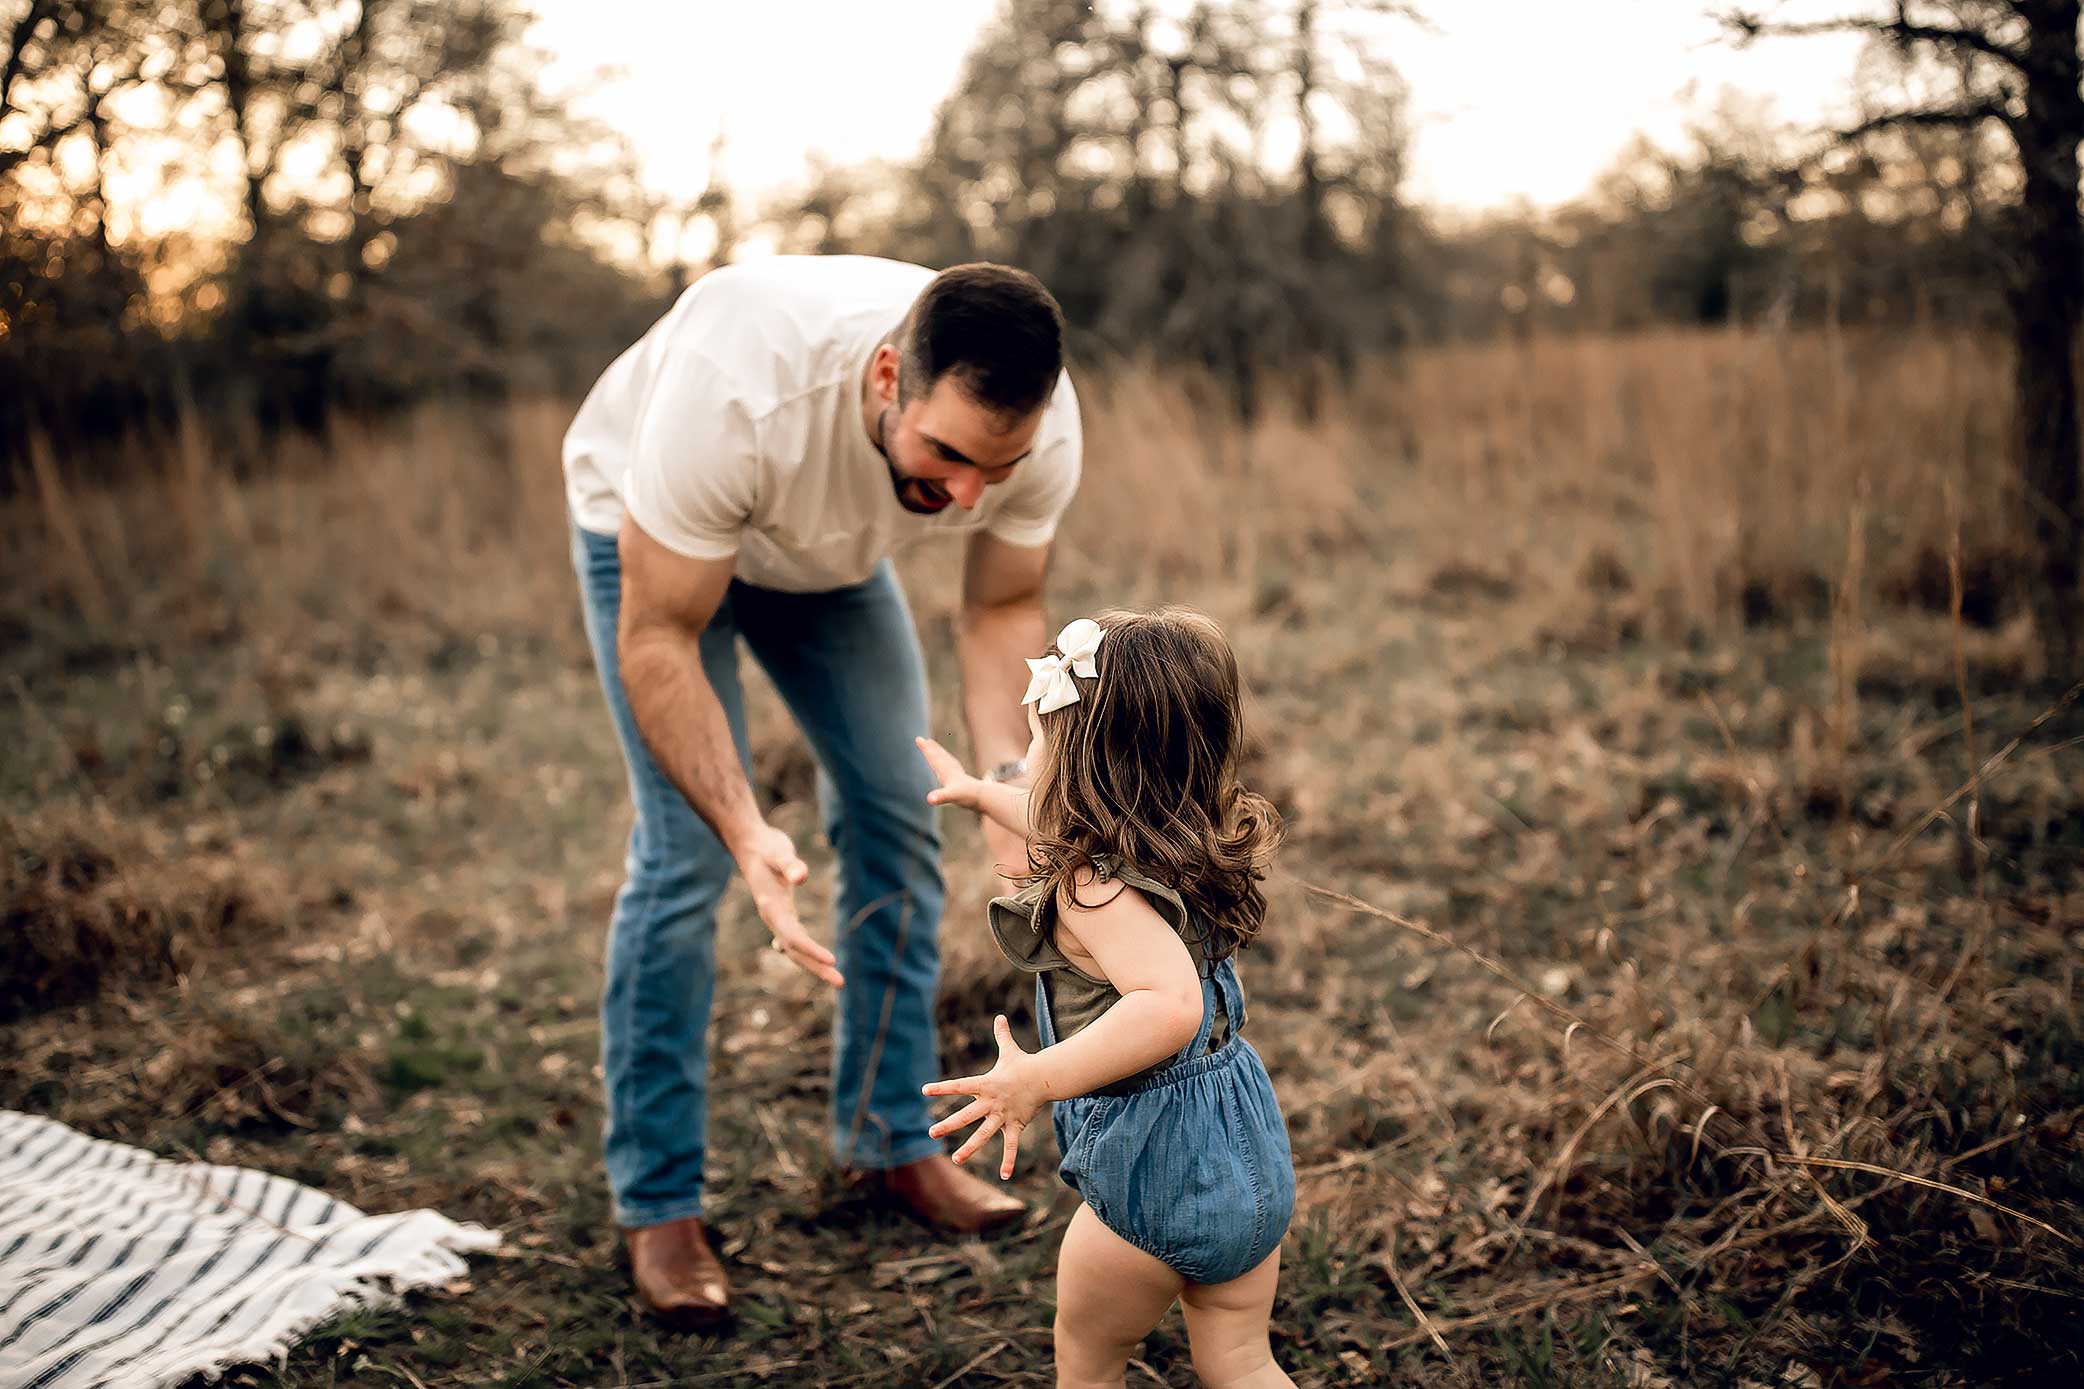 shelby-schiller-photography-sunset-family-pictures-spring-2019-54.jpg